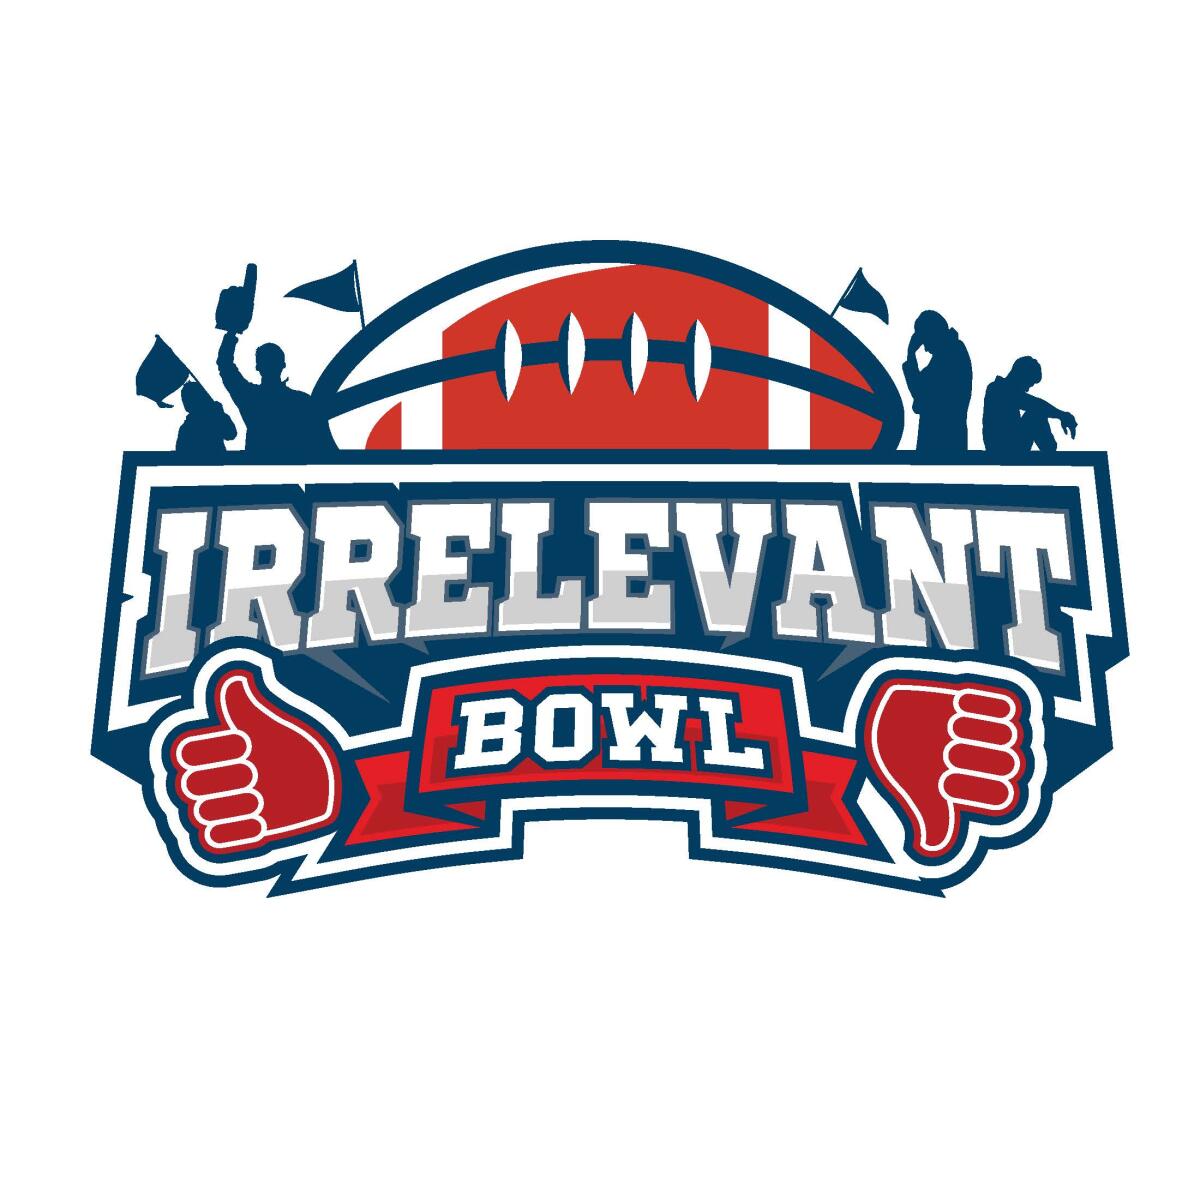 The logo for the Irrelevant Bowl.